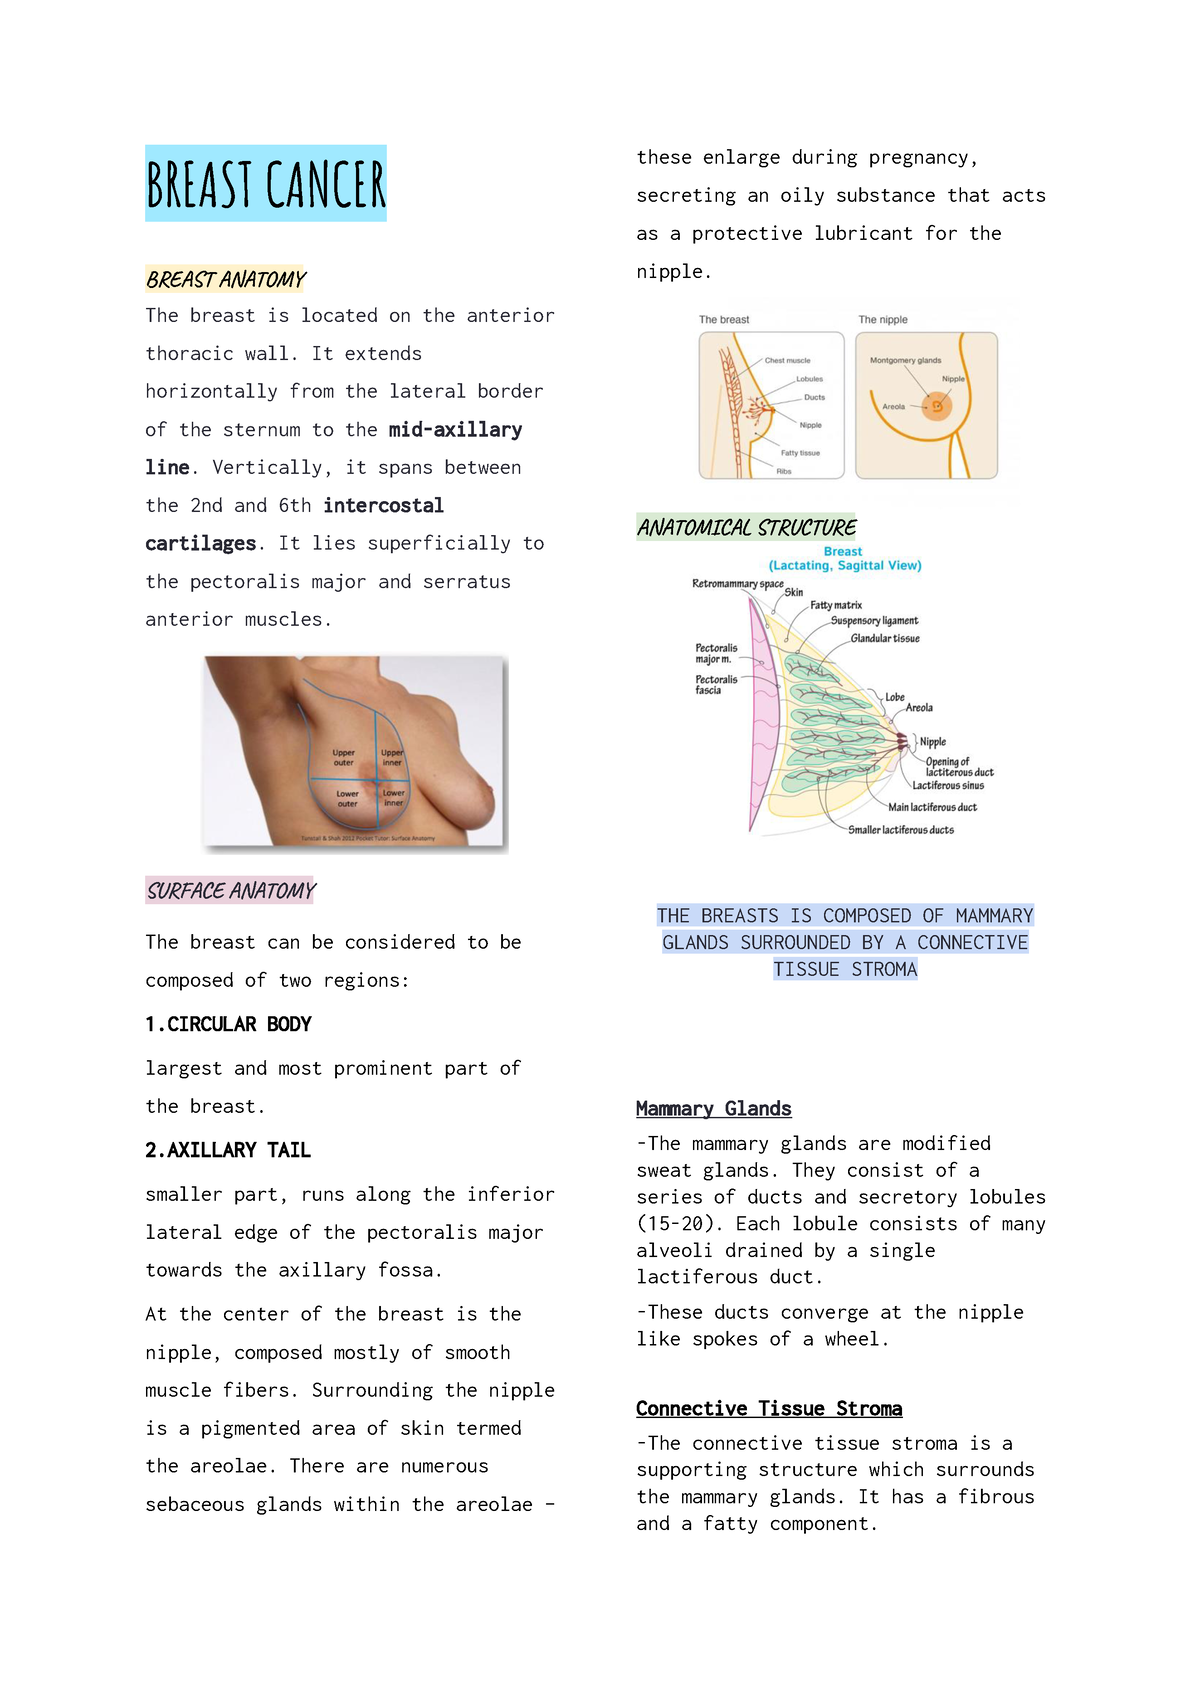 INGLES MEDICO SEMANA 1 - BREAST CANCER BREAST ANATOMY The breast is located  on the anterior thoracic - Studocu